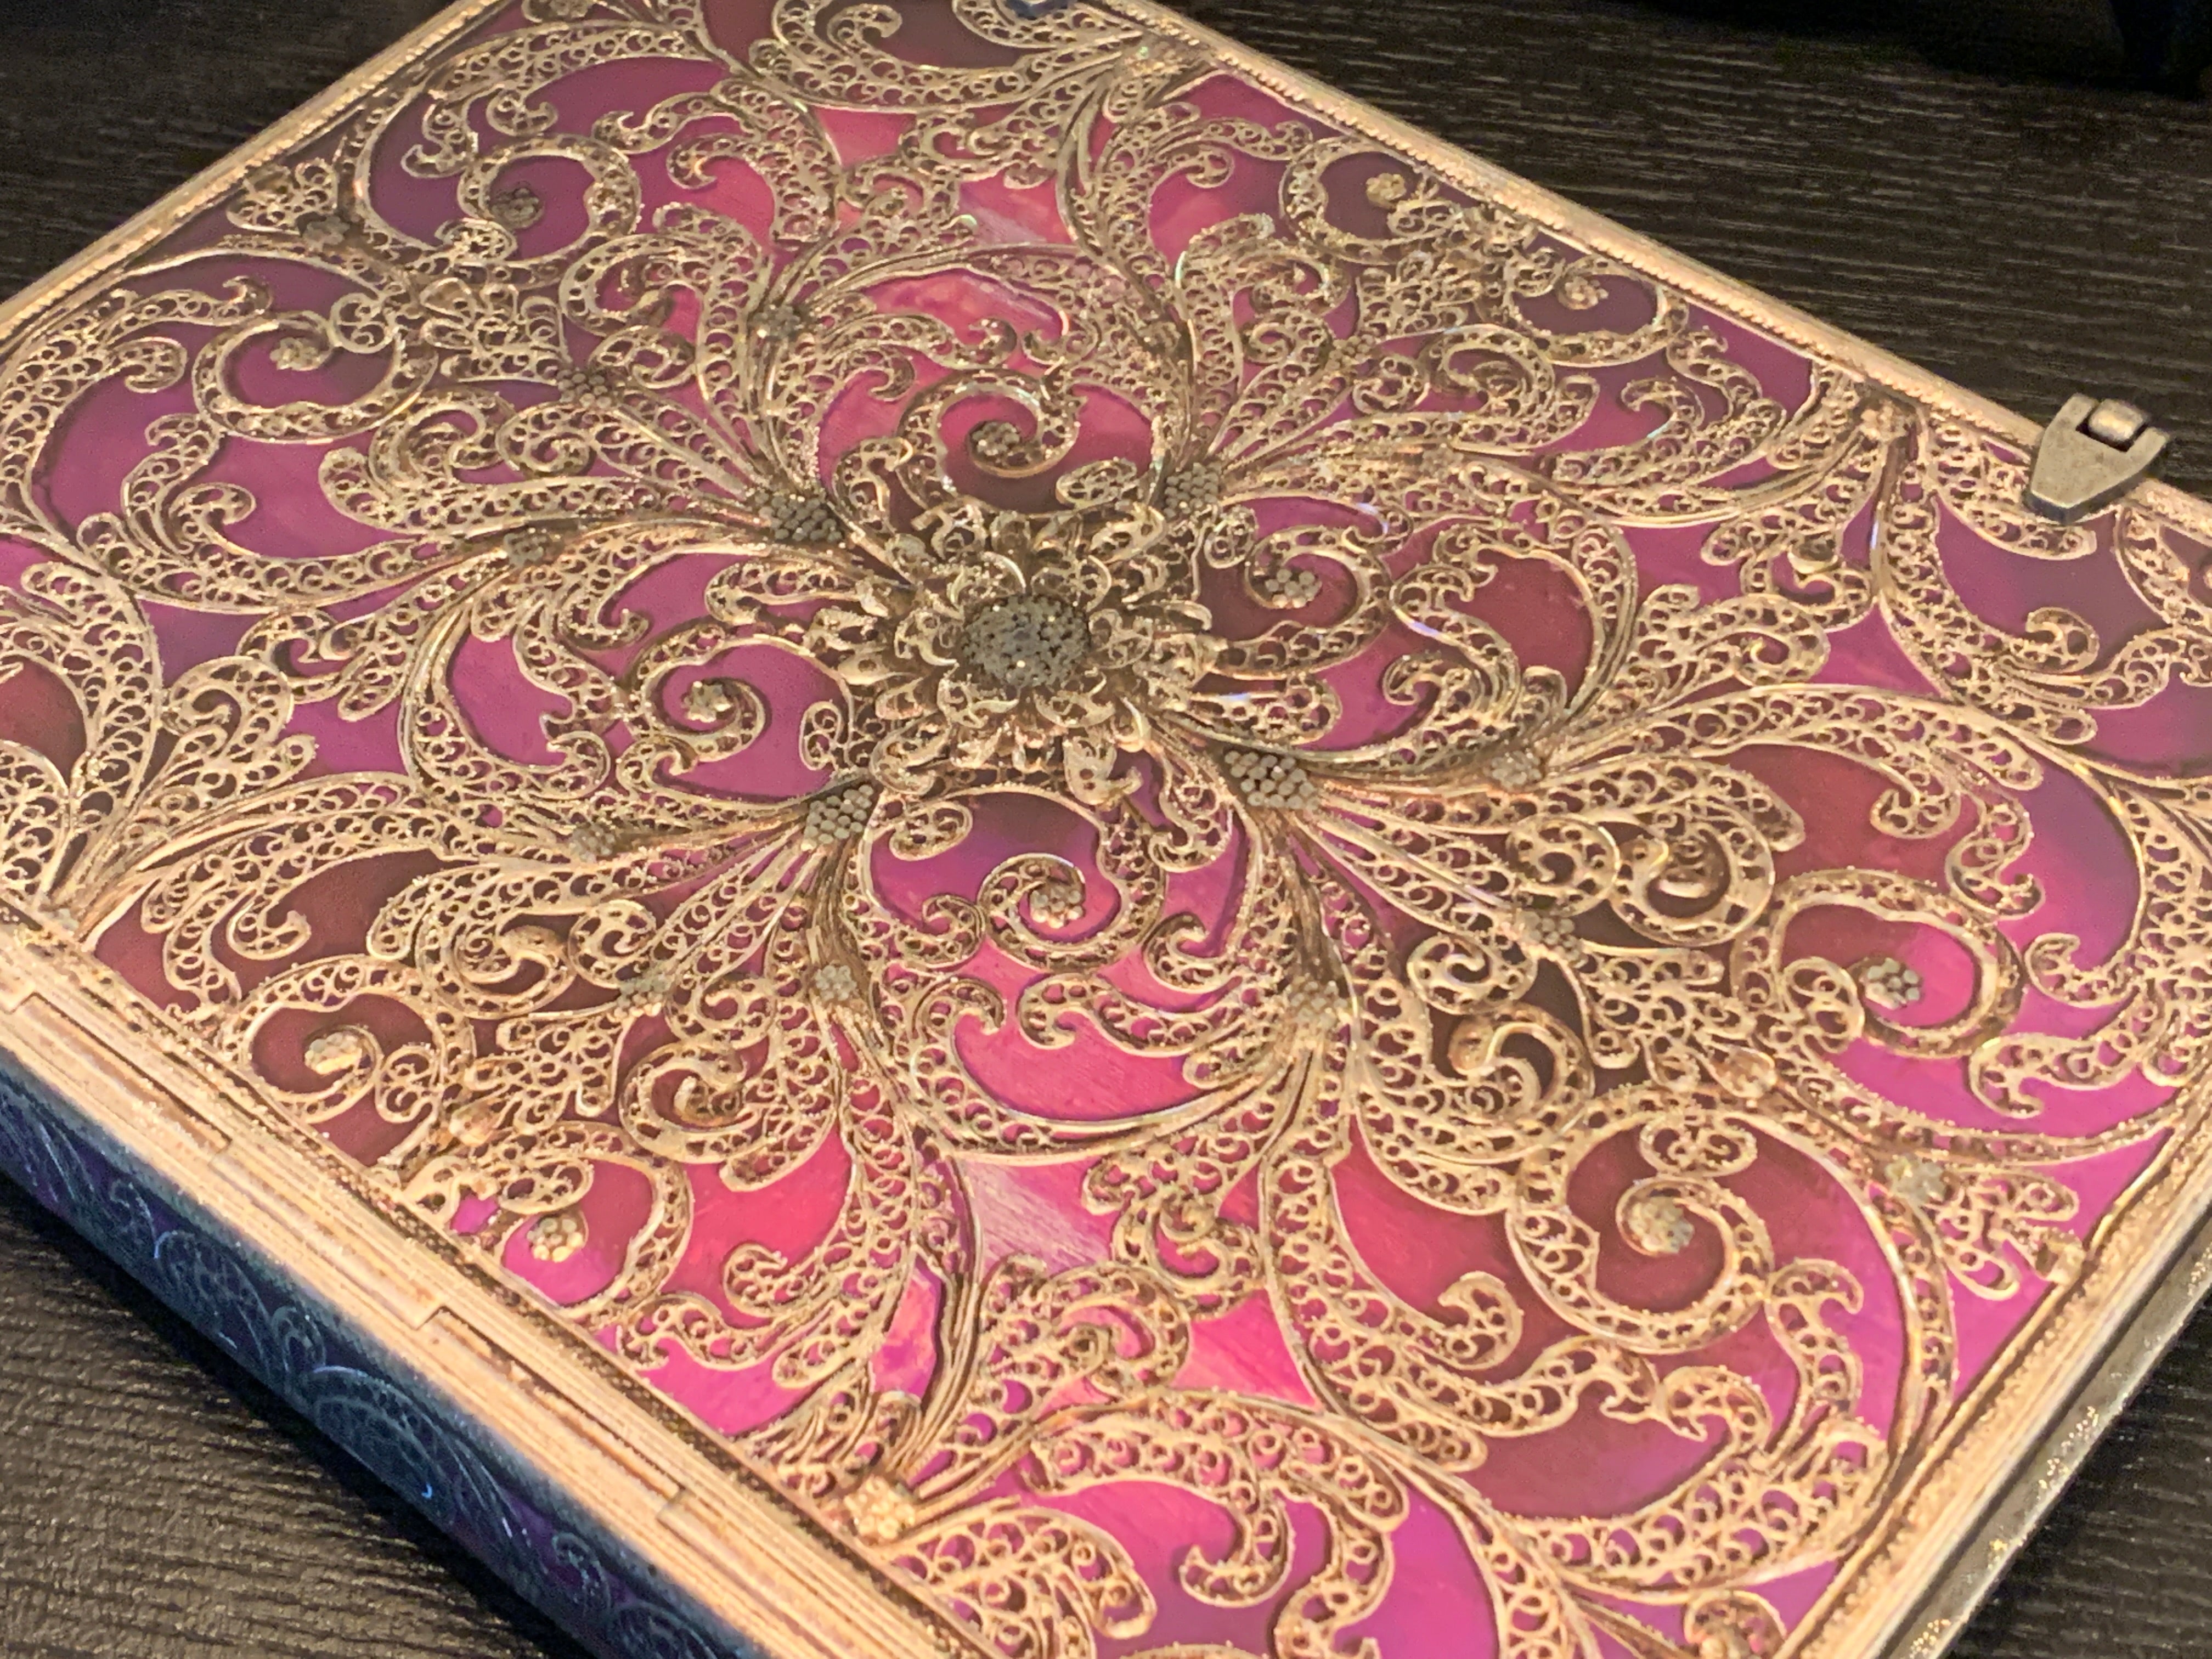 Aubergine Silver Filigree Journal with Metal Clasp Closures, Lined, Paperblanks, 9in x 7in